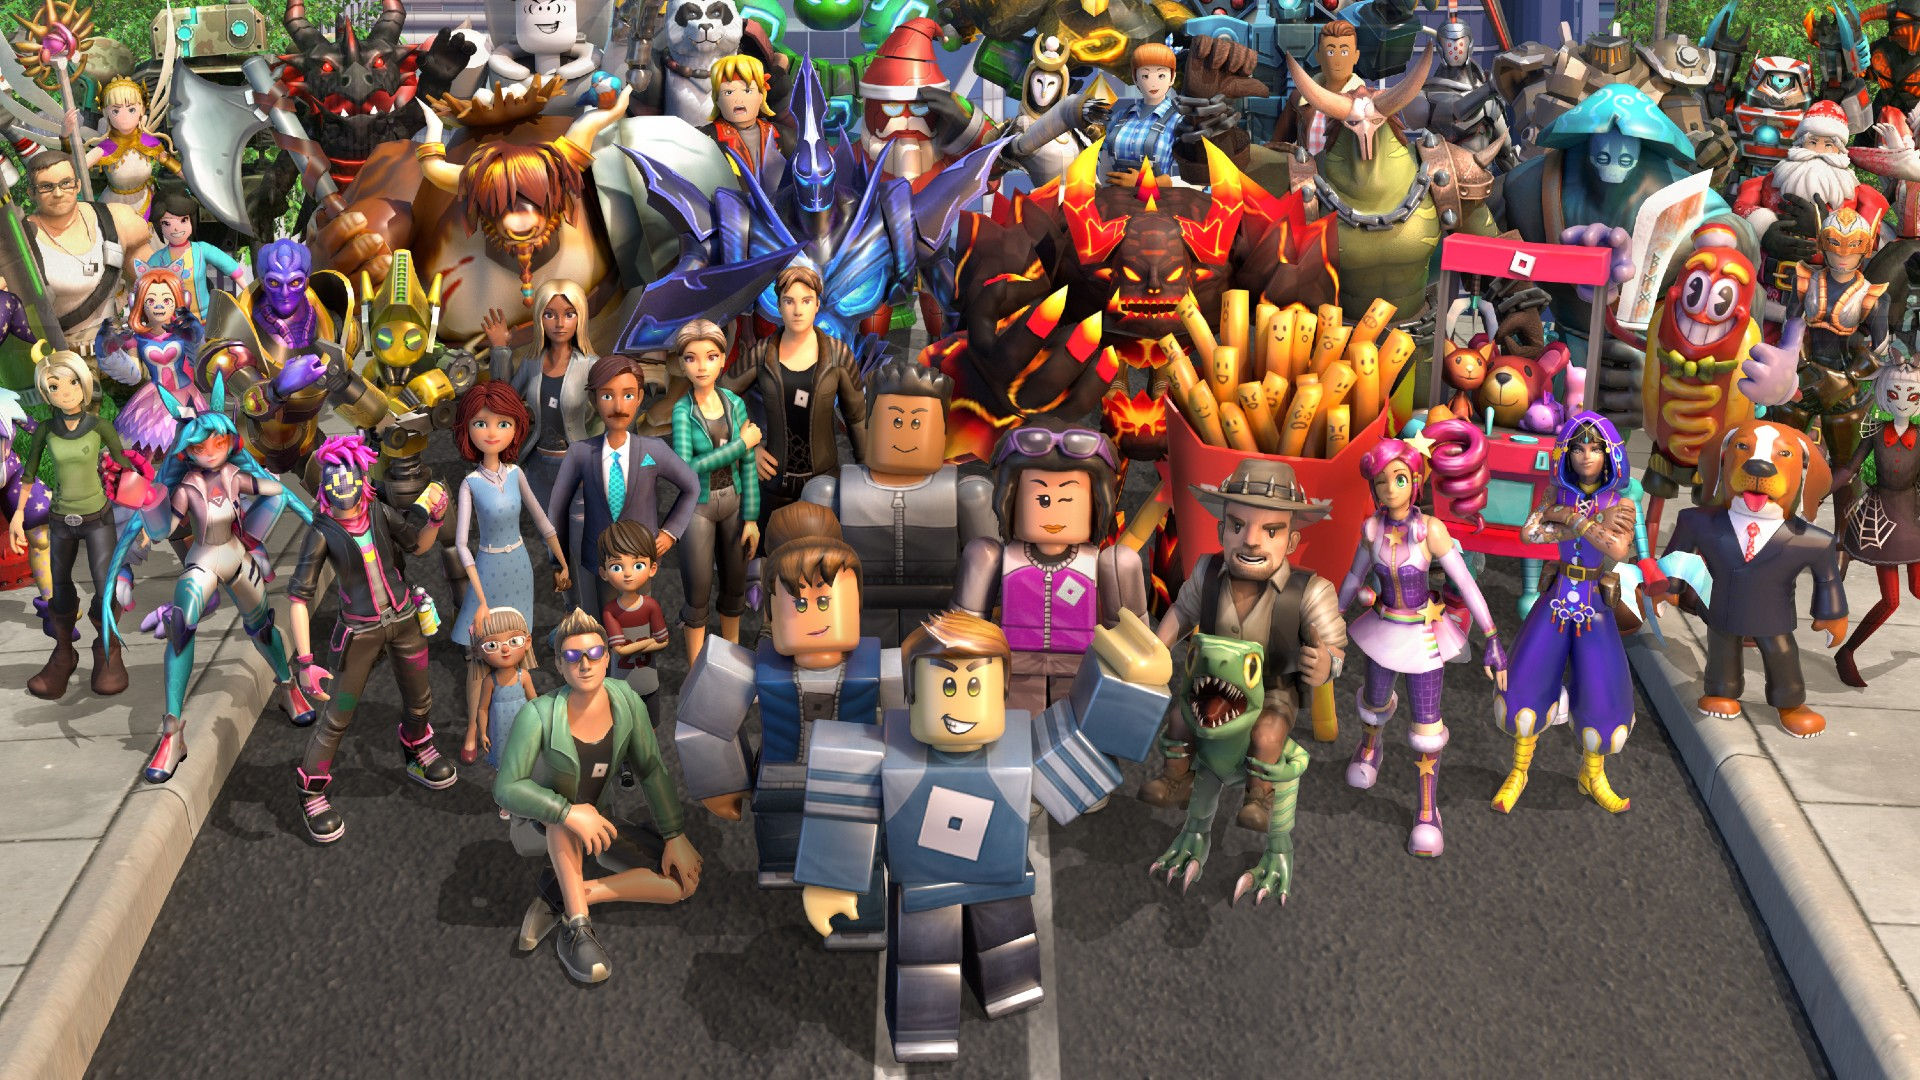 Roblox - Roblox updated their cover photo.